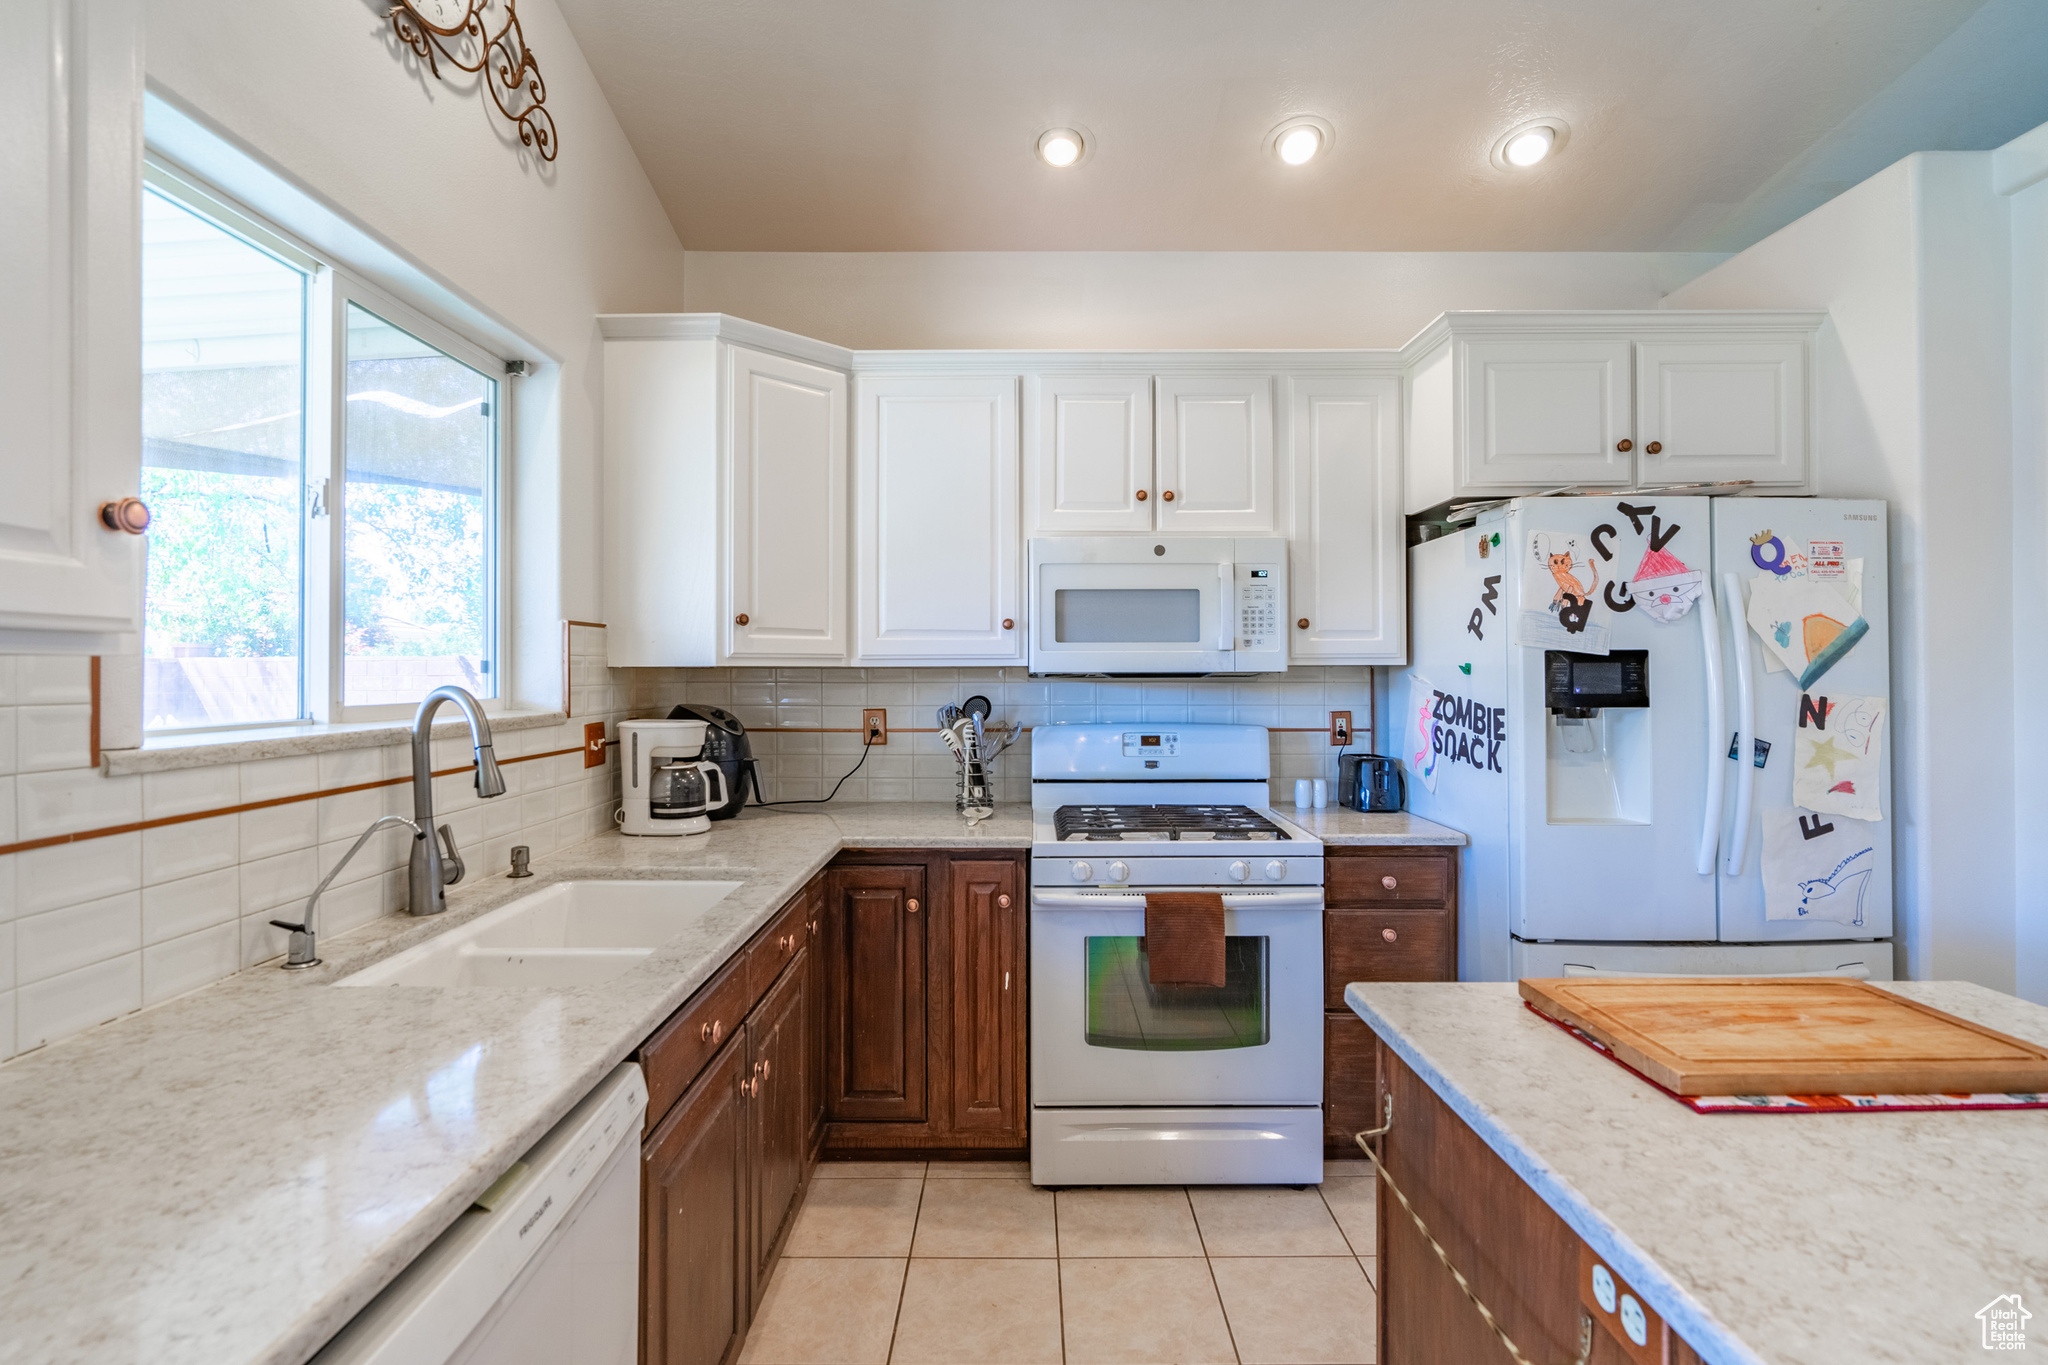 Kitchen with backsplash, white appliances, white cabinetry, sink, and light tile floors